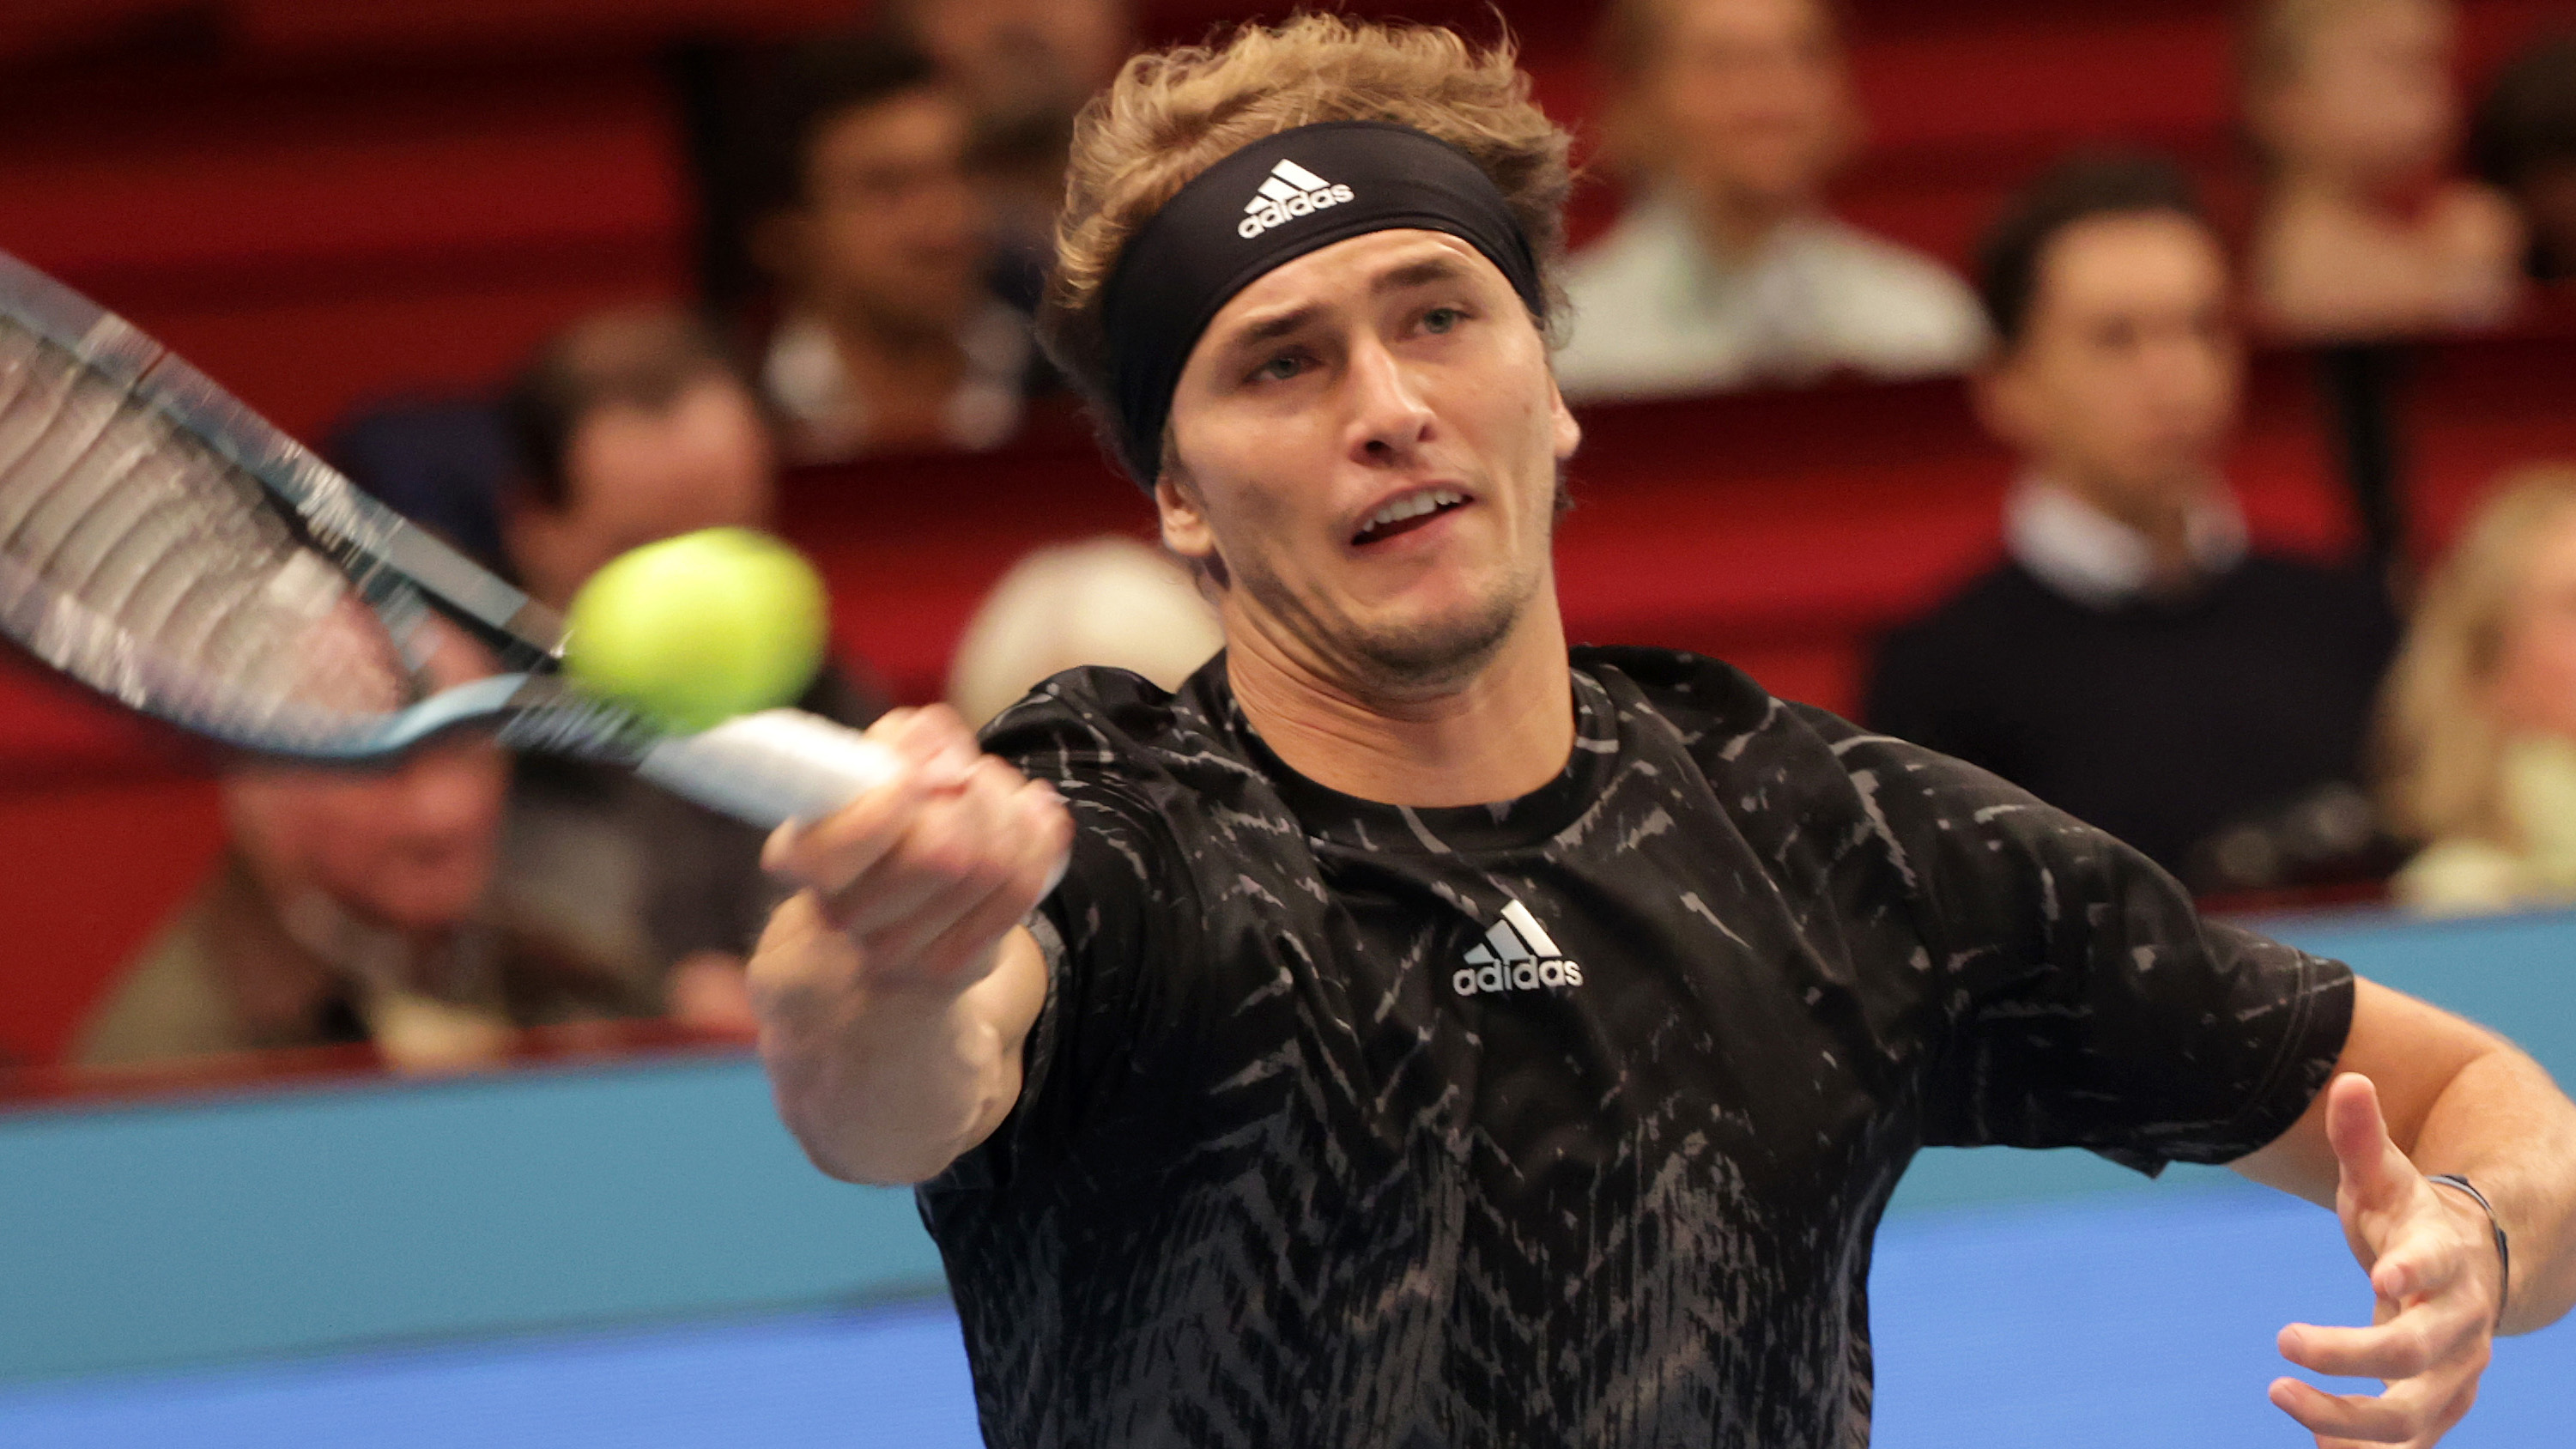 Alexander Zverev's trip to Vienna was crowned with his 18th tournament victory